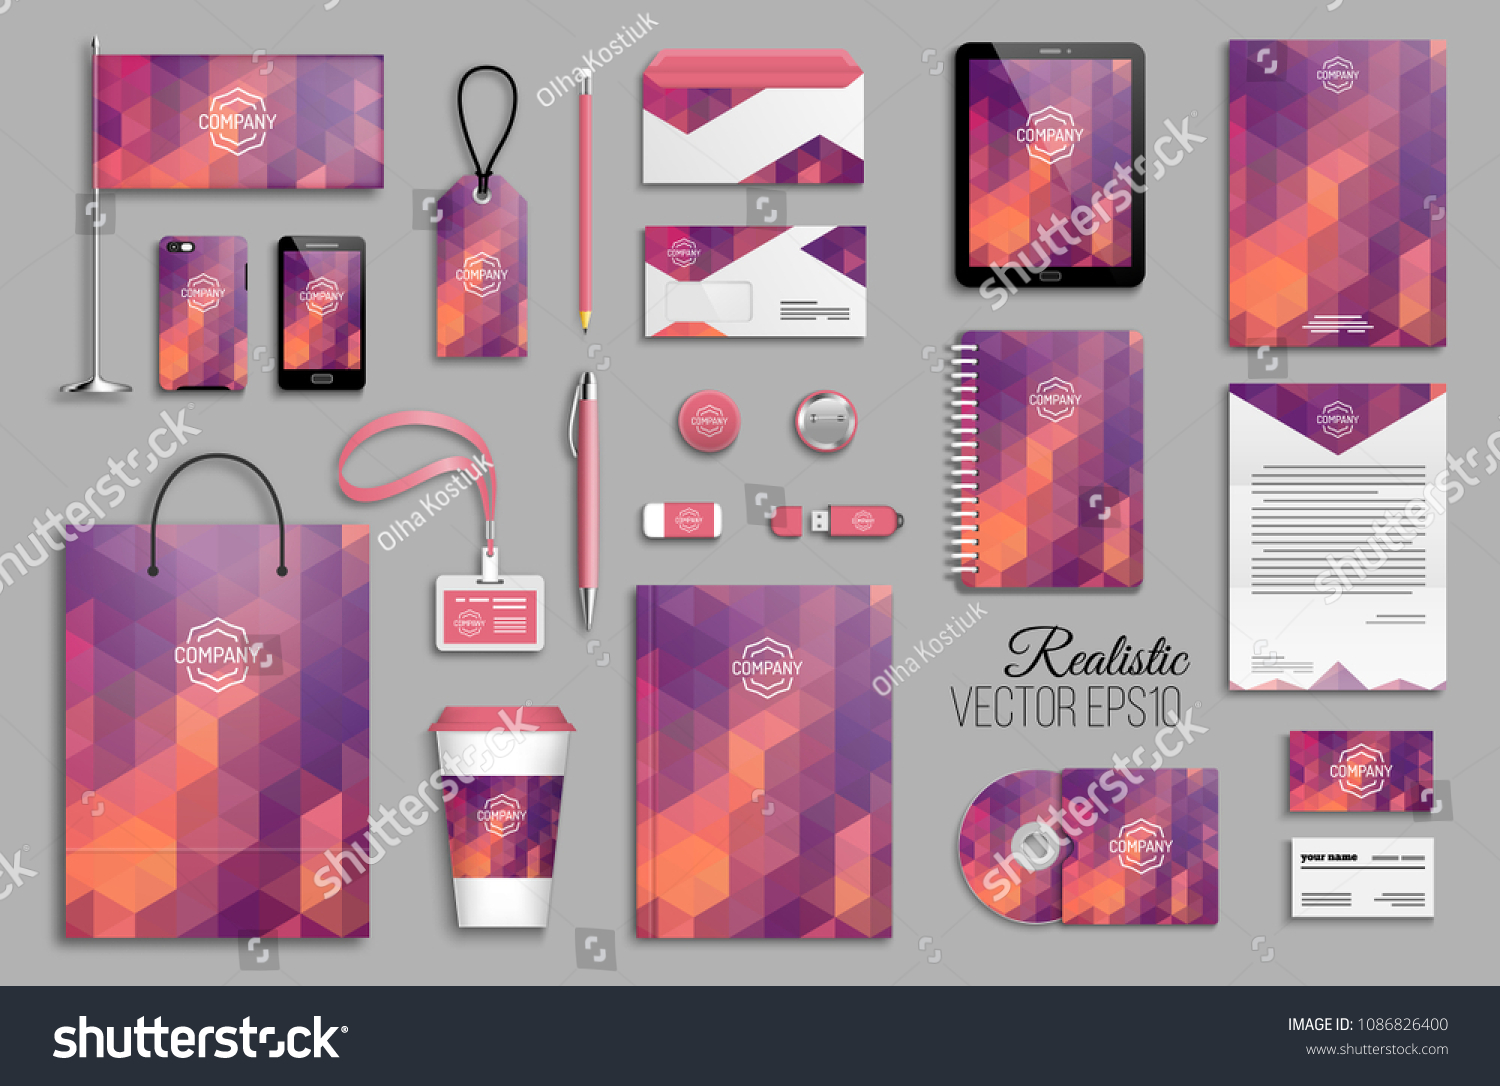 Corporate Identity Template Set Business Stationery Stock Vector Royalty Free